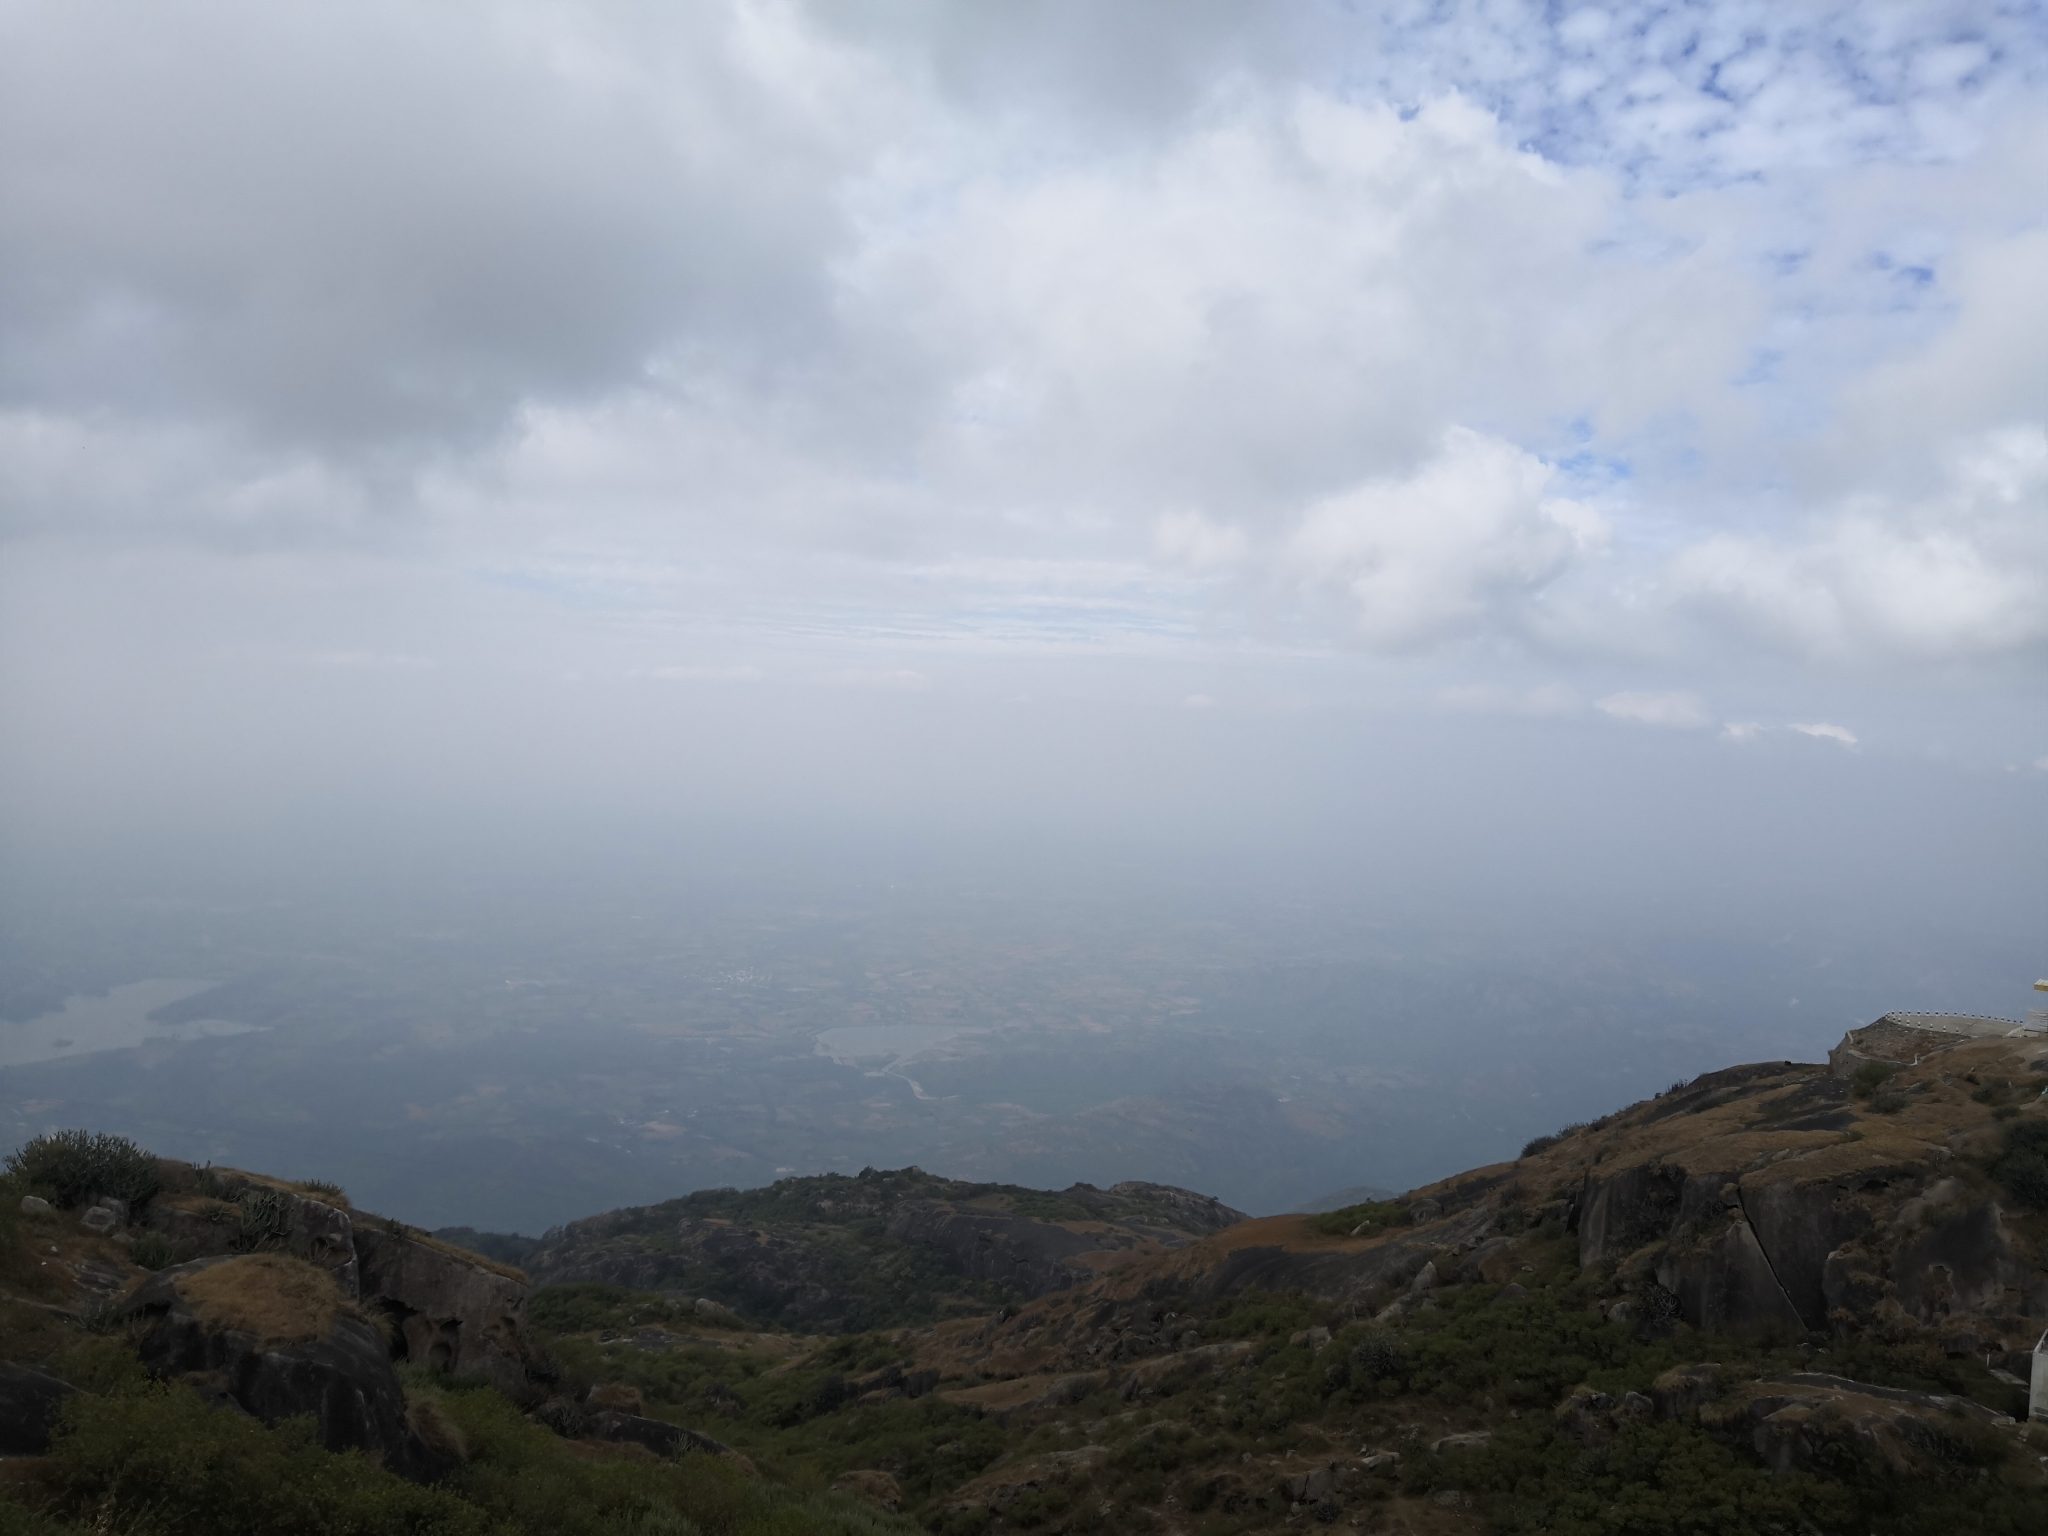 If sky is the limit, I guess I have touched that limit. I can literally feel morning clouds in my hand. I took this pic out of my excitement when I visited mt. Abu. & get involved in the nature.